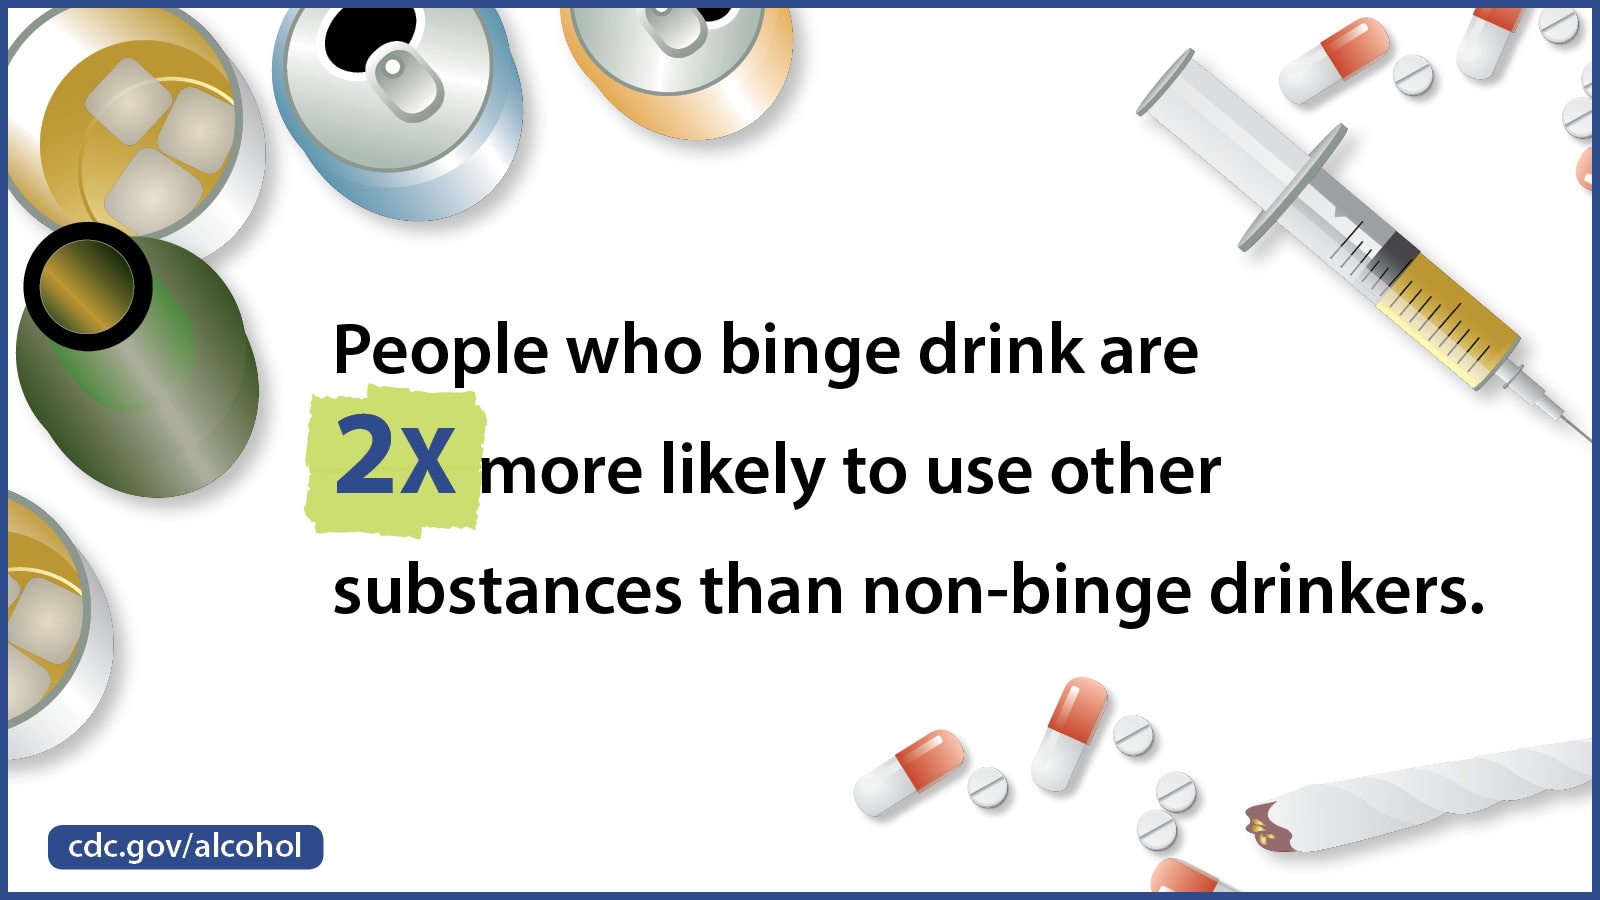 People who binge drink are 2x more likely to use other substances than non-binge drinkers.